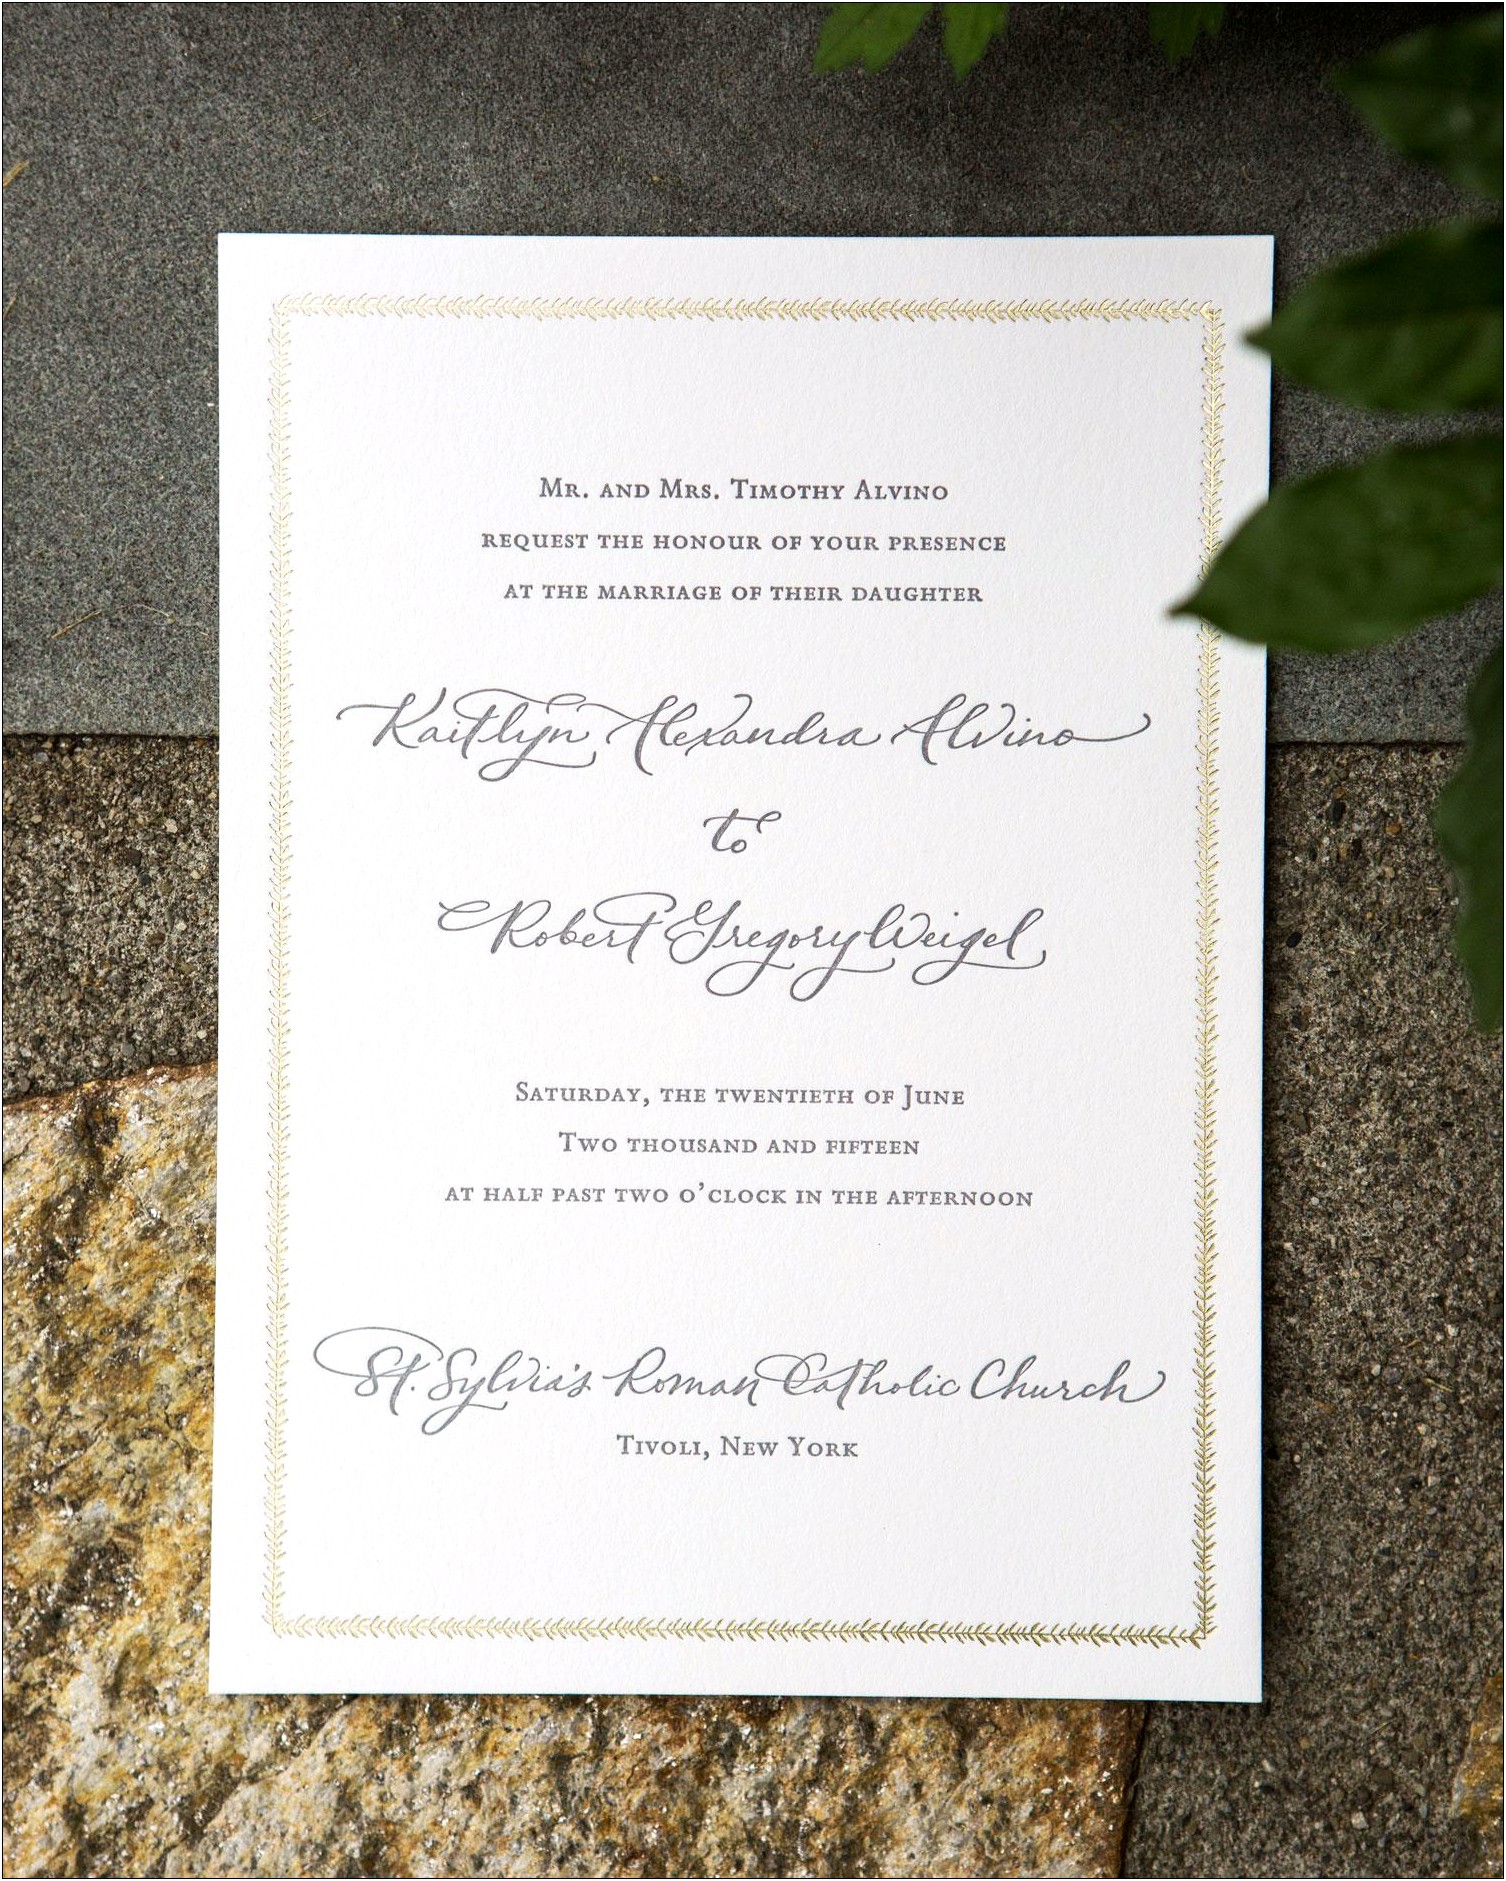 Daughter Of Parents On Wedding Invites